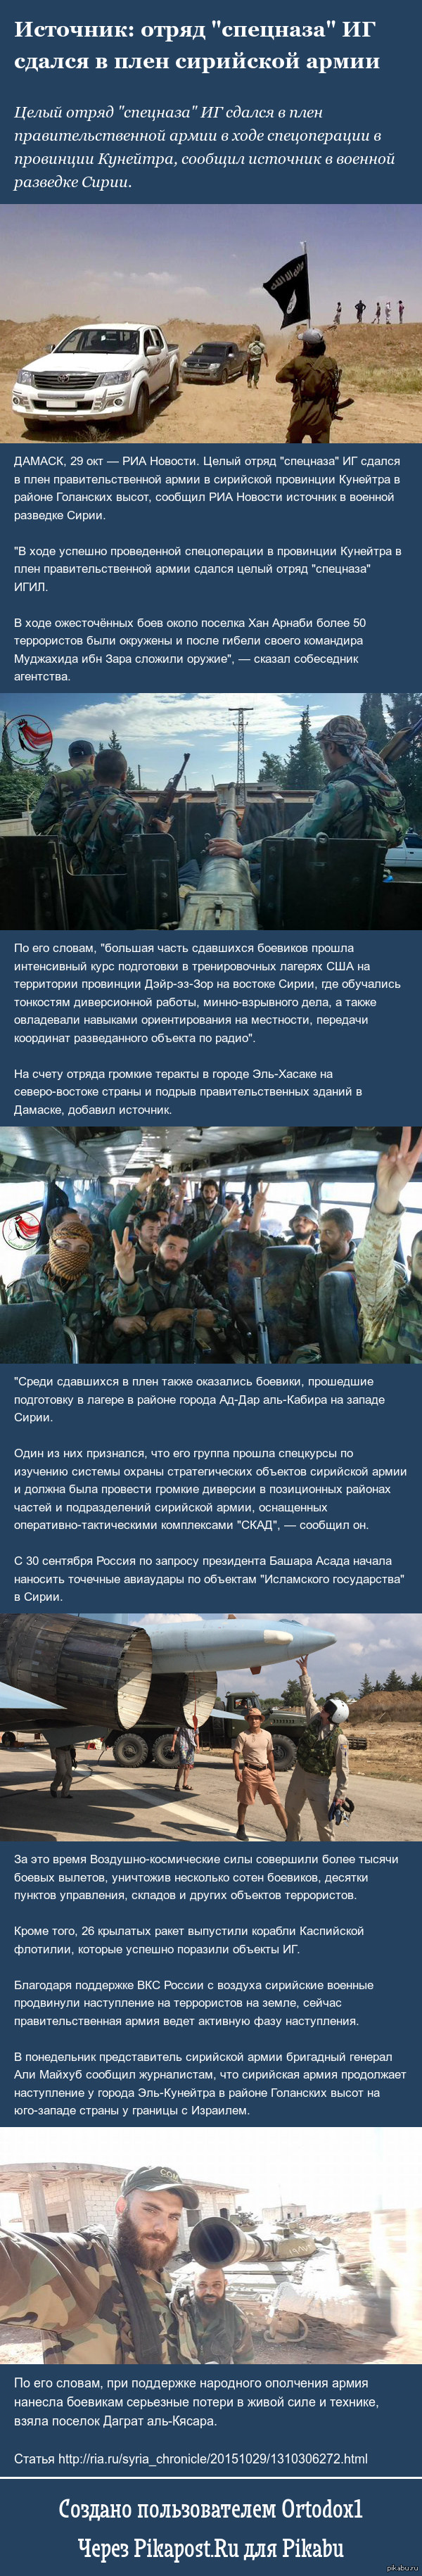 :  &quot;&quot;        http://ria.ru/syria_chronicle/20151029/1310306272.html